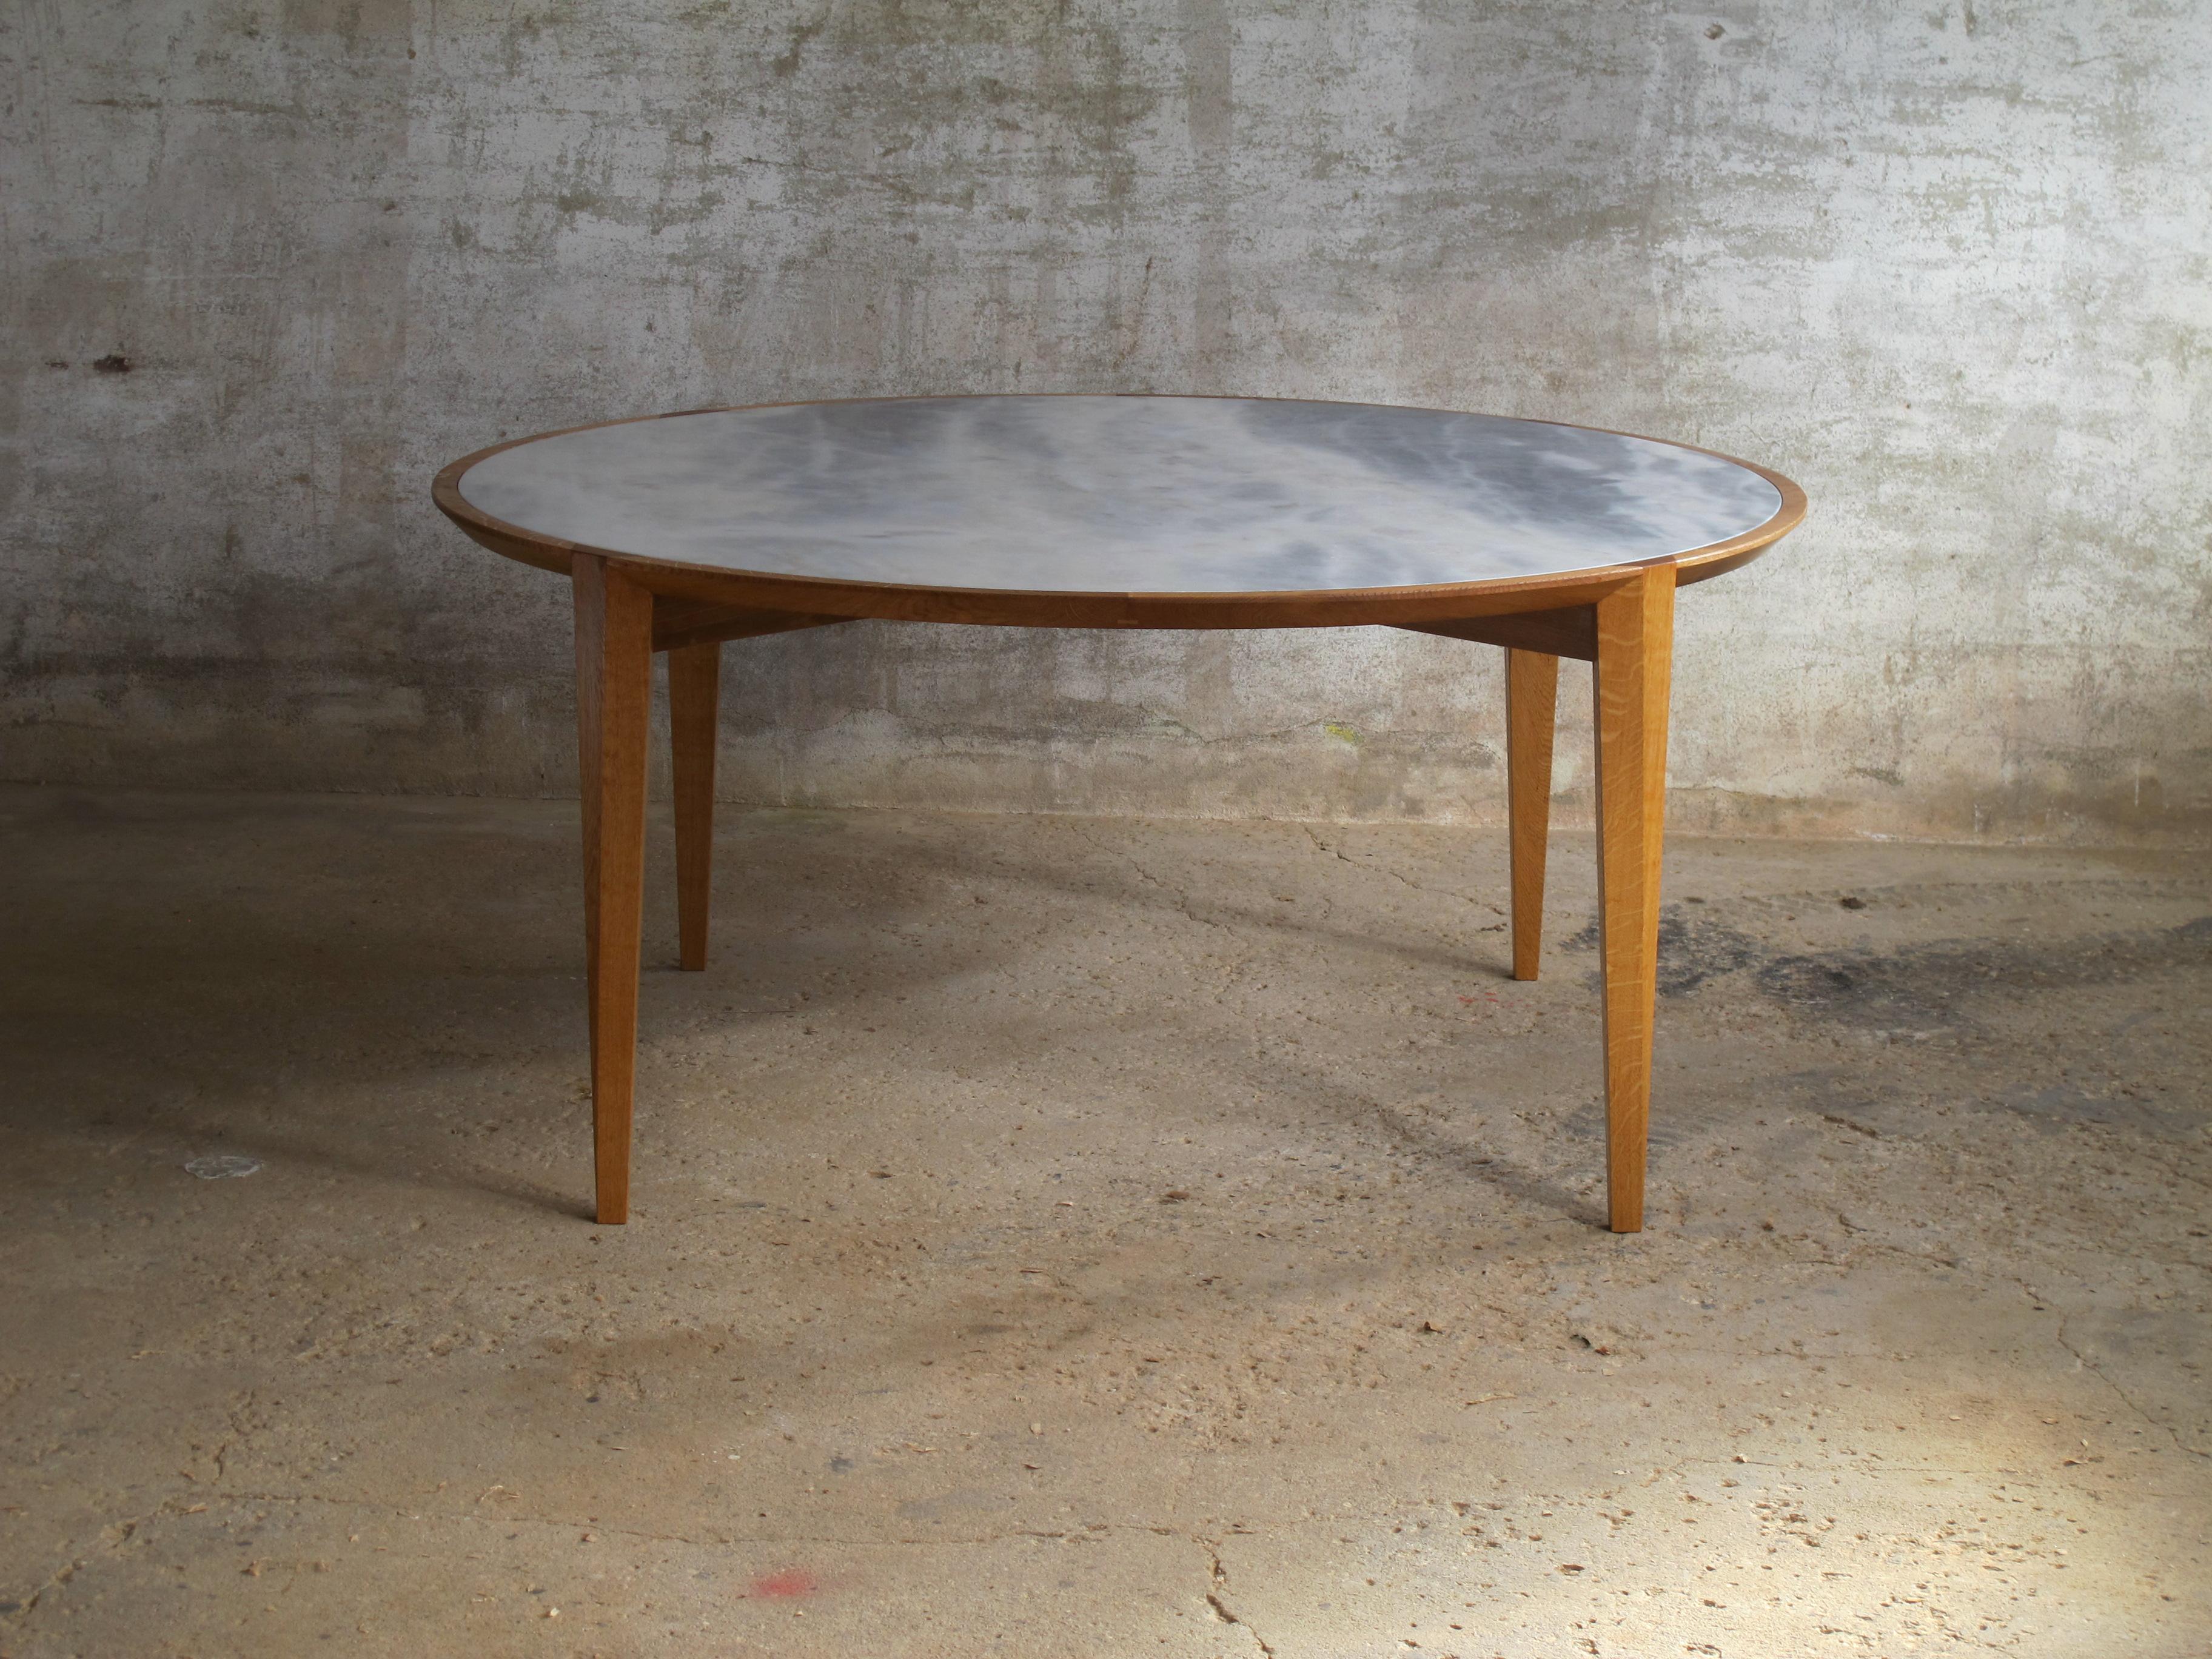 Contemporary AT Dining Table, Round, Solid Oak with Estremoz Marble Top by Tomaz Viana For Sale